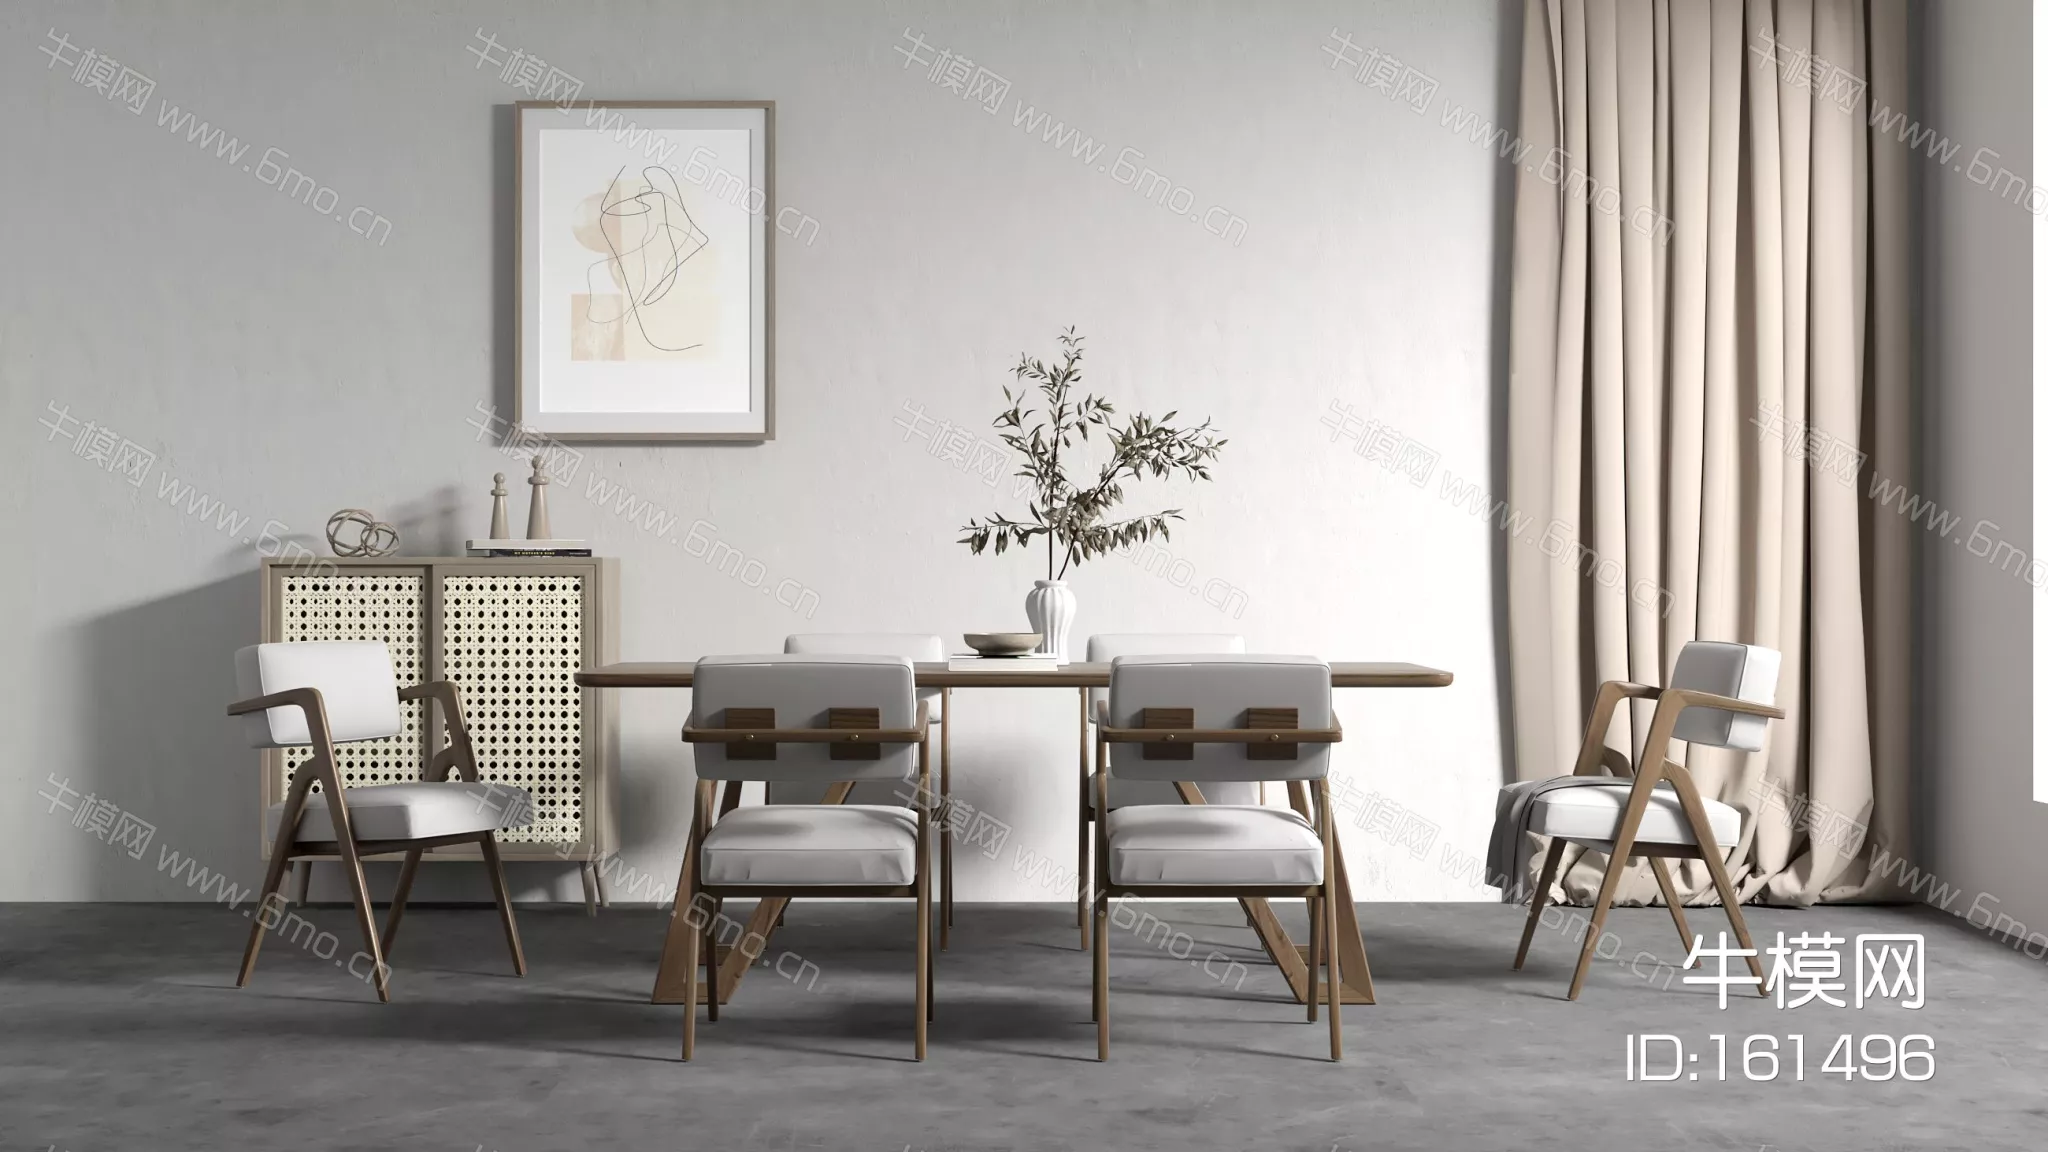 NORDIC DINING TABLE SET - SKETCHUP 3D MODEL - VRAY - 161496